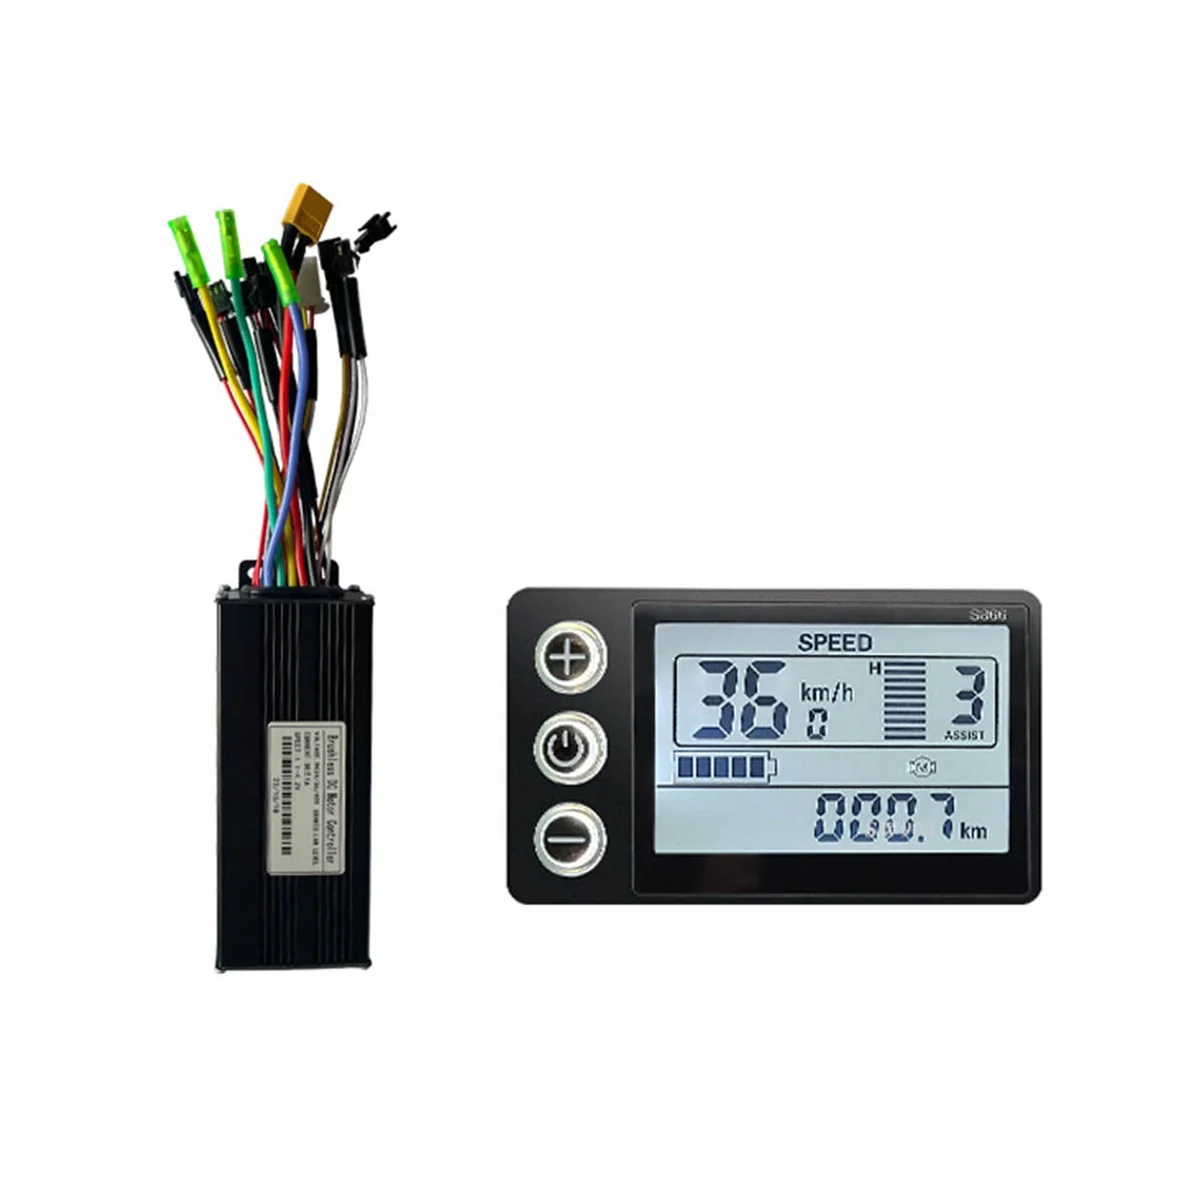 

Electric Bicycle 24V 36V 48V 30A 3 Model Sinewave Controller S866 LCD Display for 350W 500W 750W 1000W Ebike